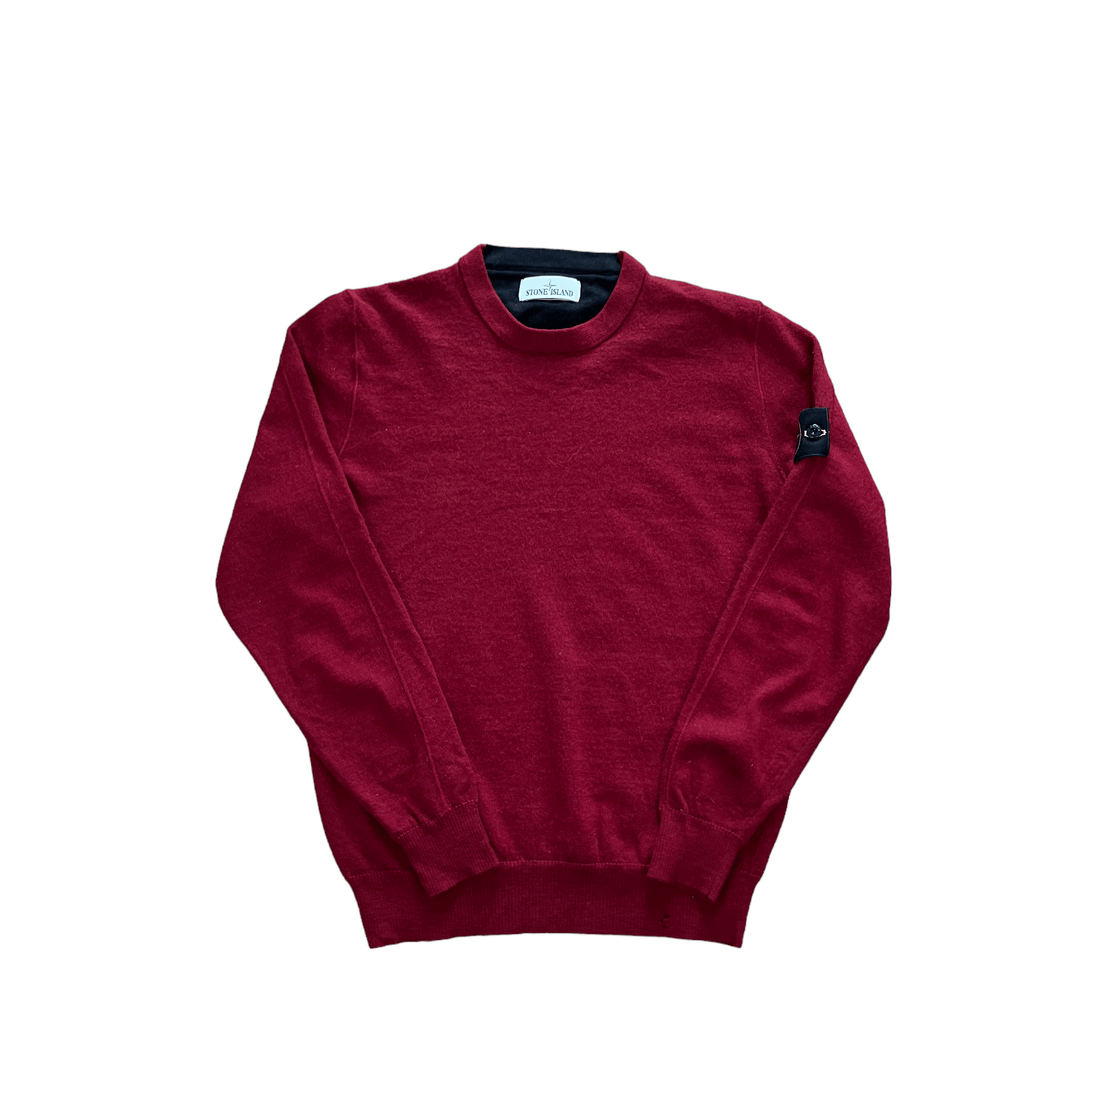 Vintage Red Stone Island Sweatshirt - Recommended Size - Small - The Streetwear Studio